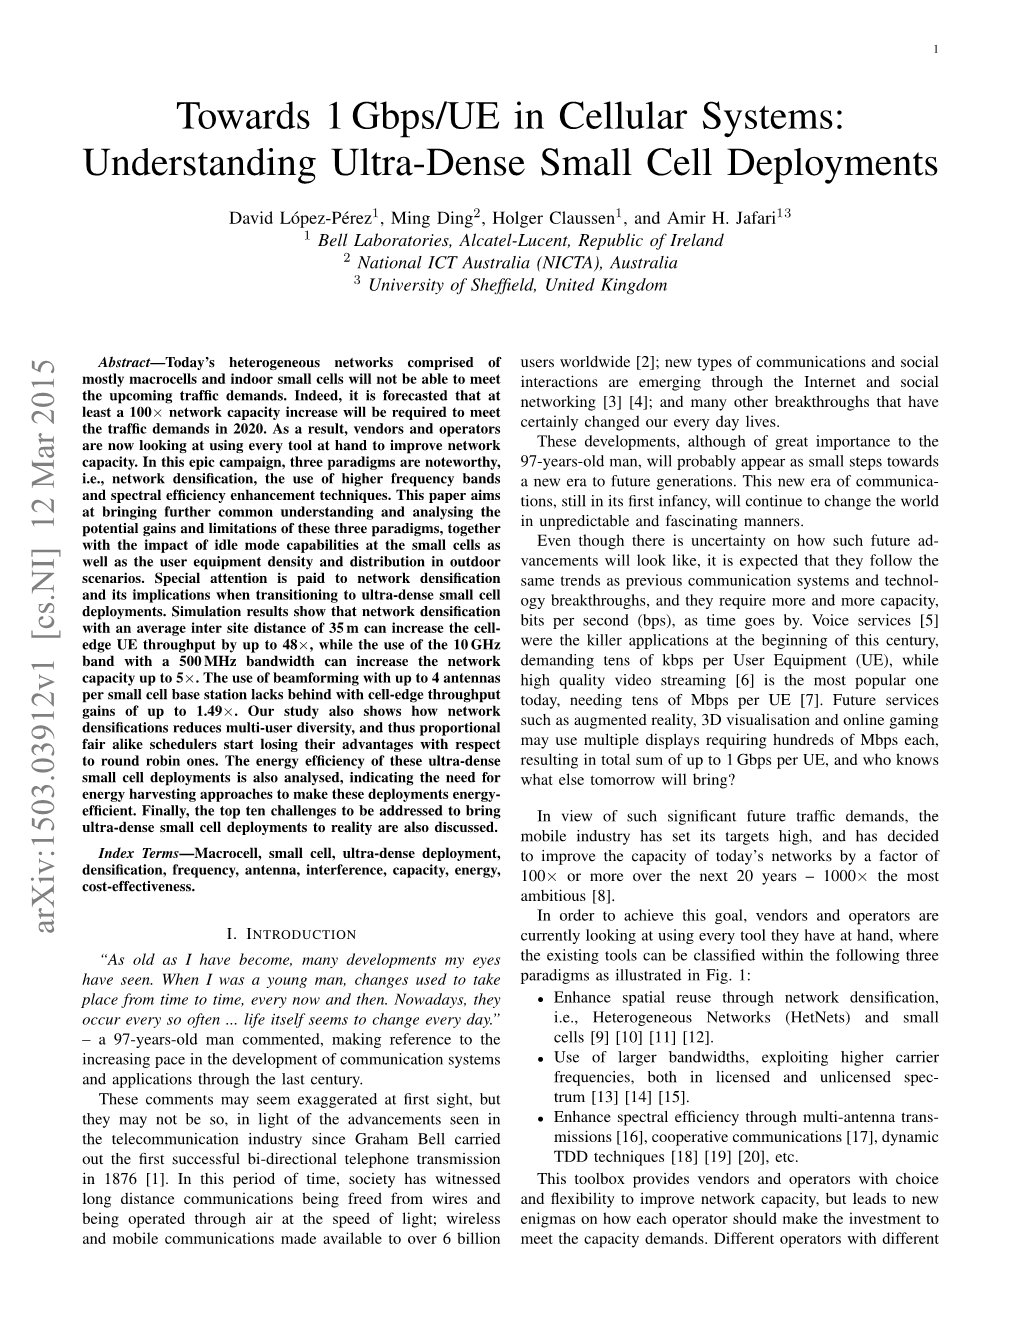 Towards 1 Gbps/UE in Cellular Systems: Understanding Ultra-Dense Small Cell Deployments